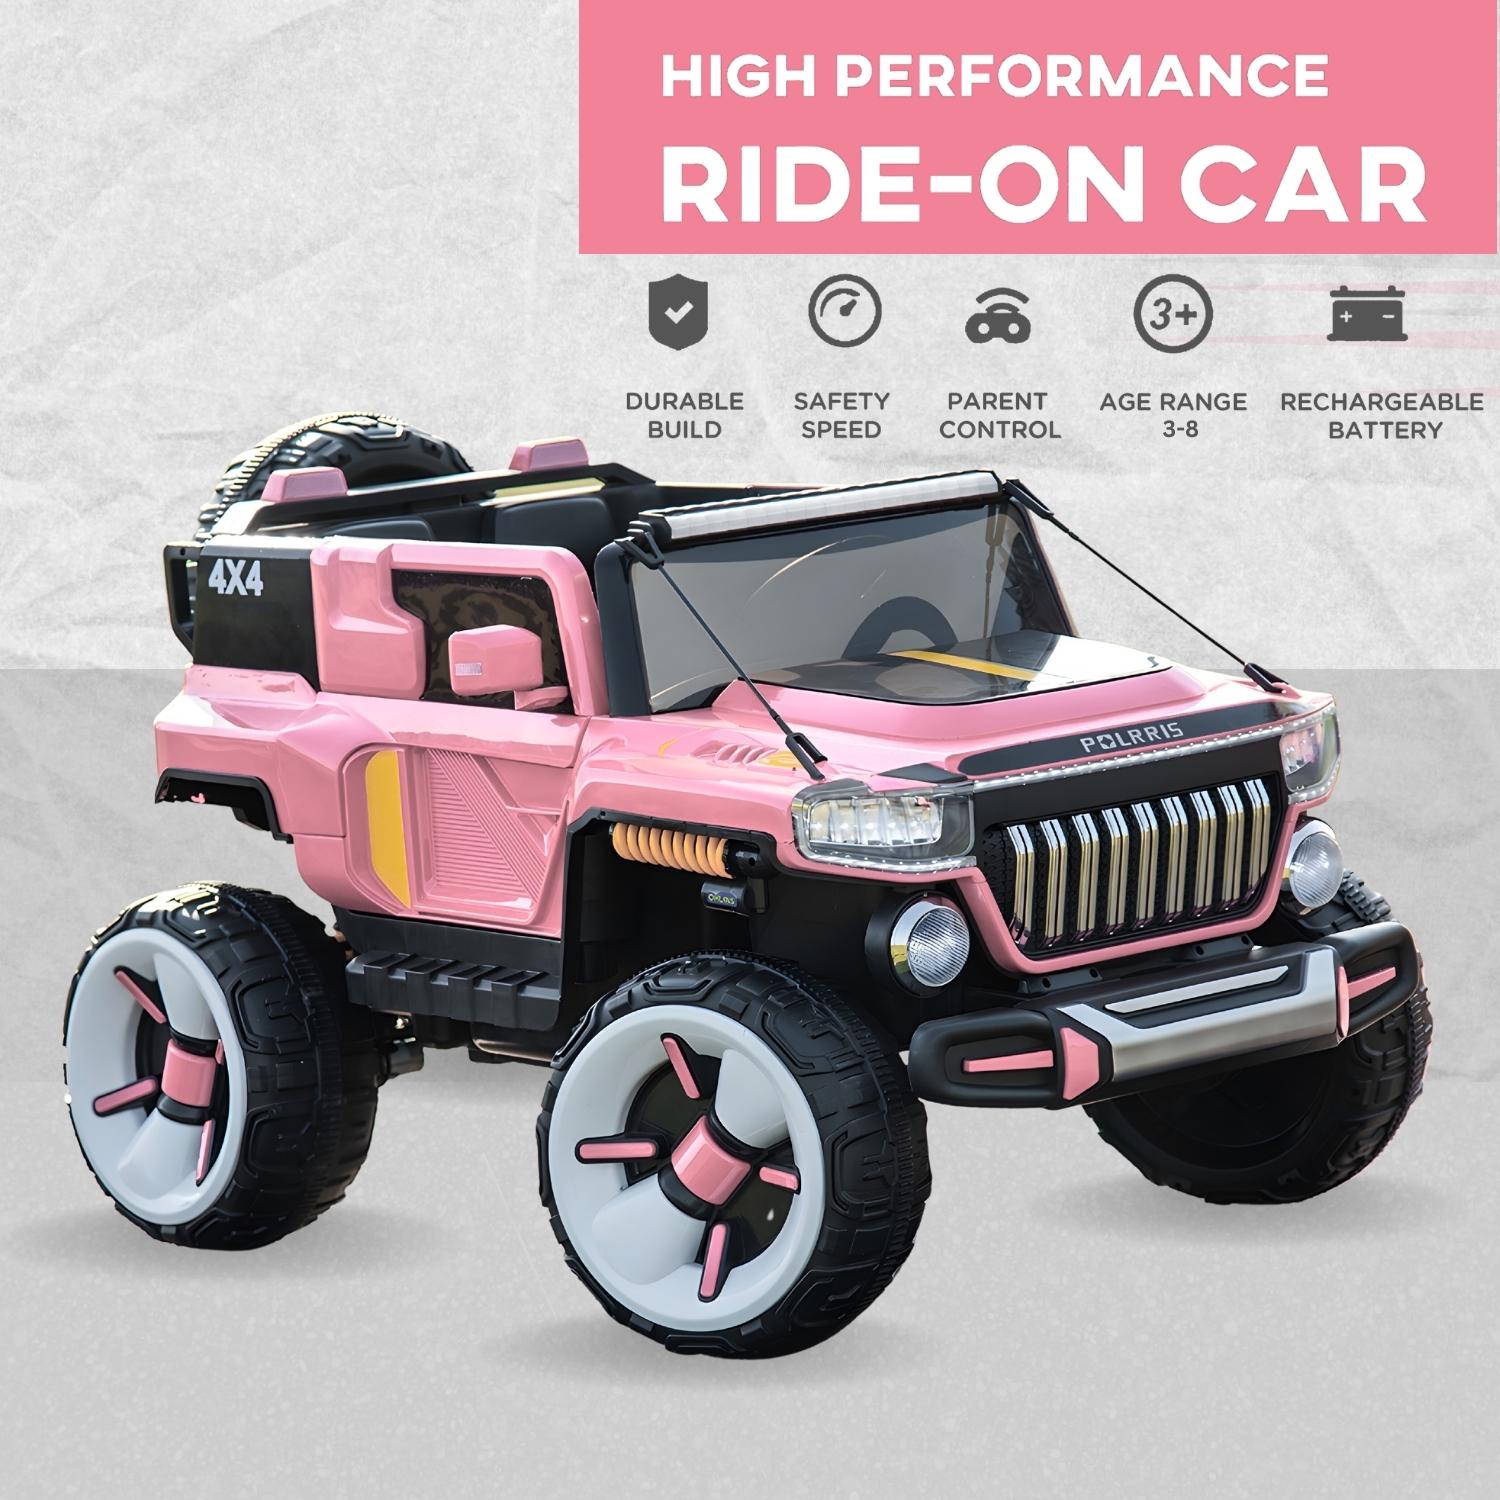 Baby Moo Electric Ride-on Jeep for Kids With Rechargeable 12V Battery, LED Lights, Music and USB Port Remote Control Double Seat - Pink